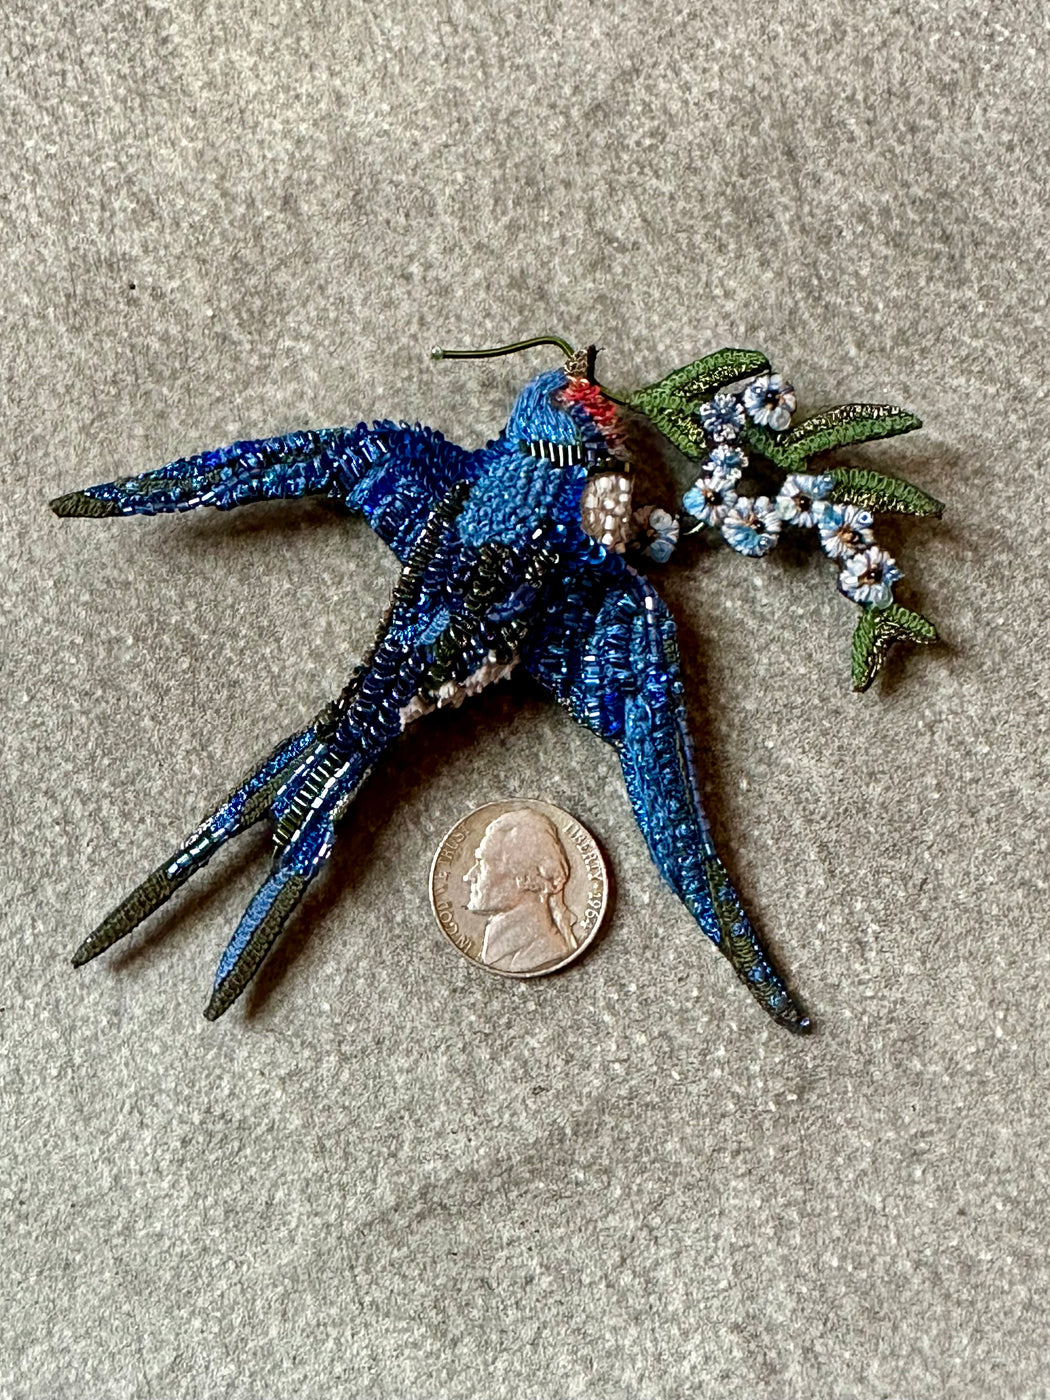 Large "Peace Swallow" Brooch by Trovelore